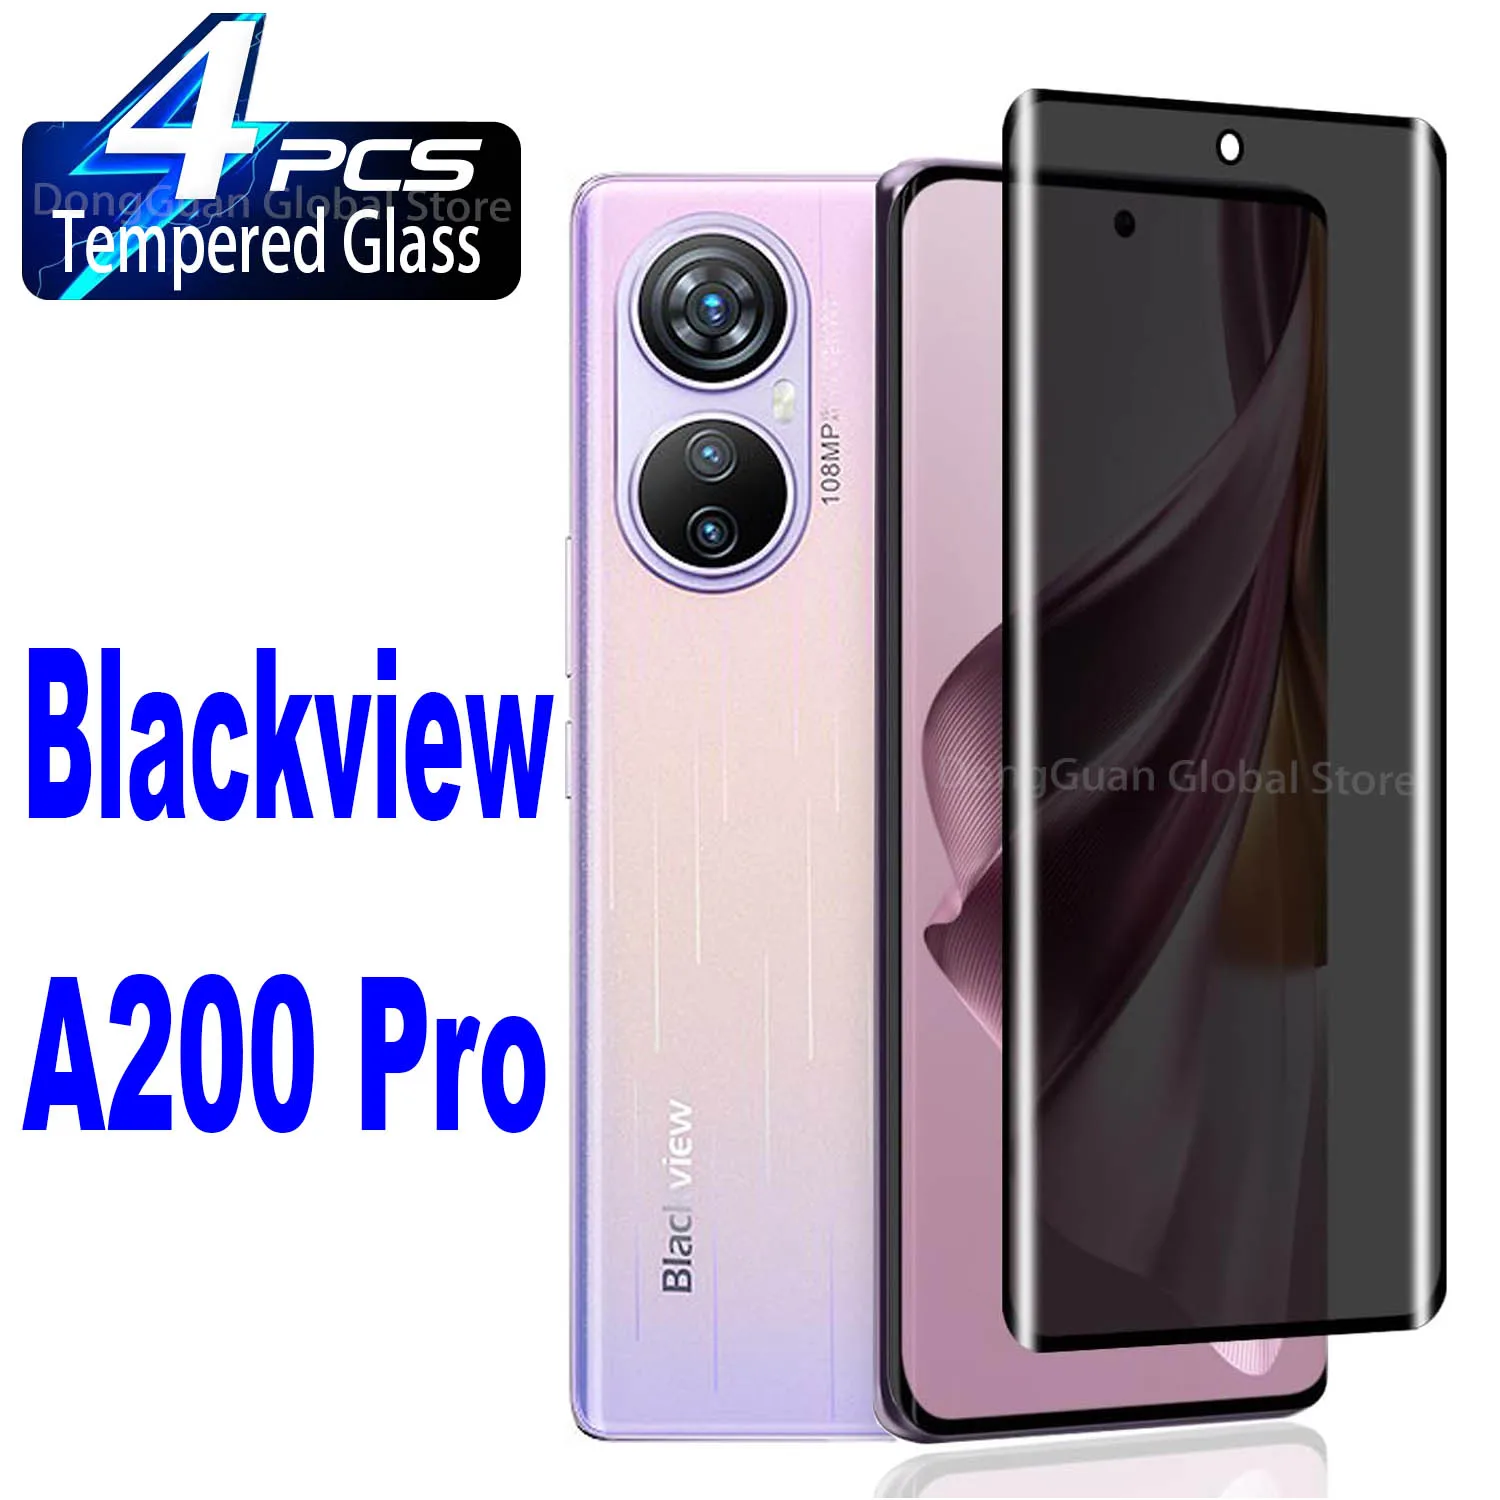 

1/4Pcs Anti Spy Tempered Glass For Blackview A200 Pro Screen Protector Privacy Glass Film